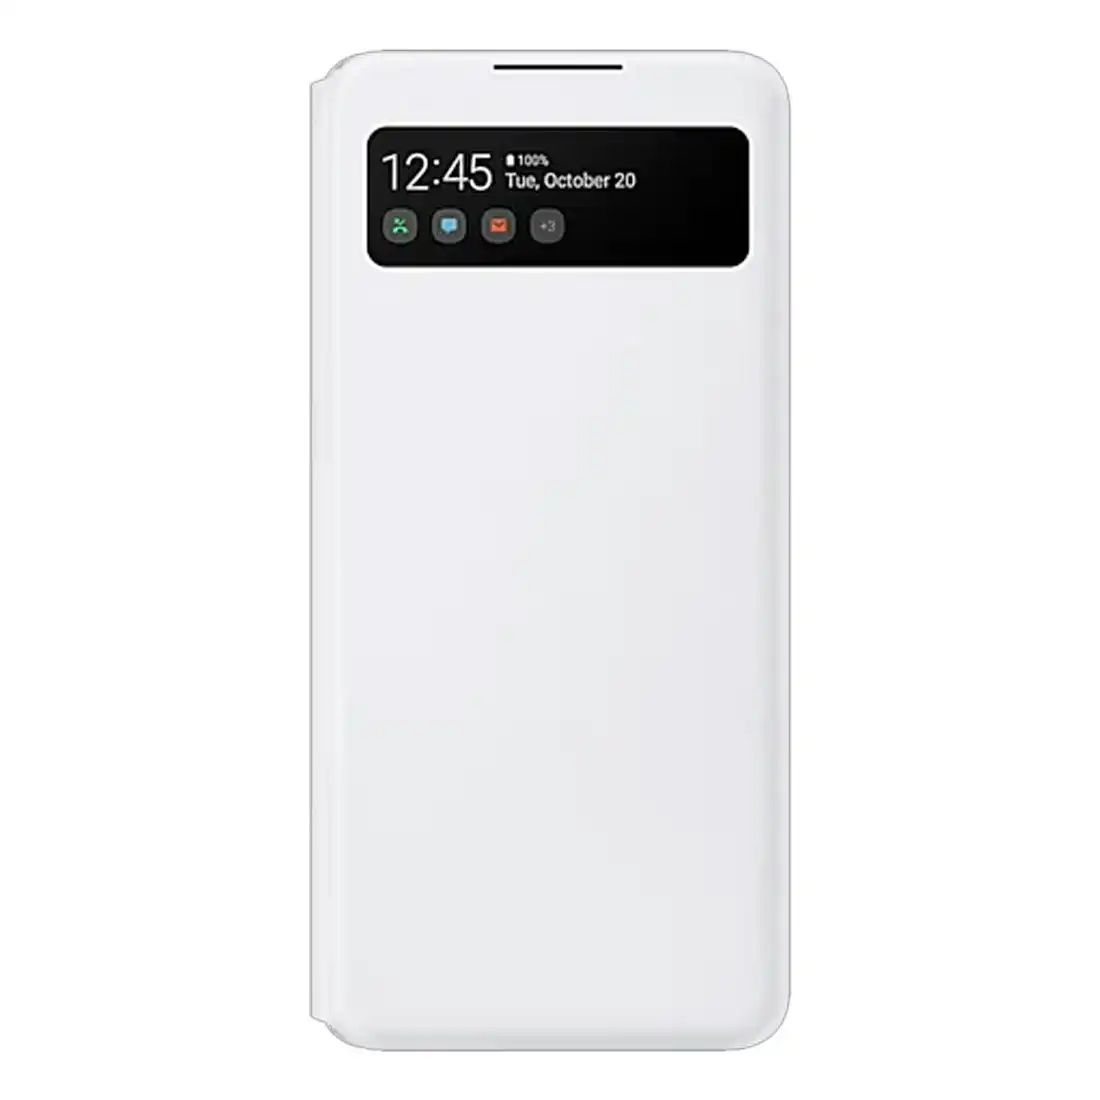 Samsung Galaxy A42 5G S View Wallet Cover EF-EA426PWEGWW - White